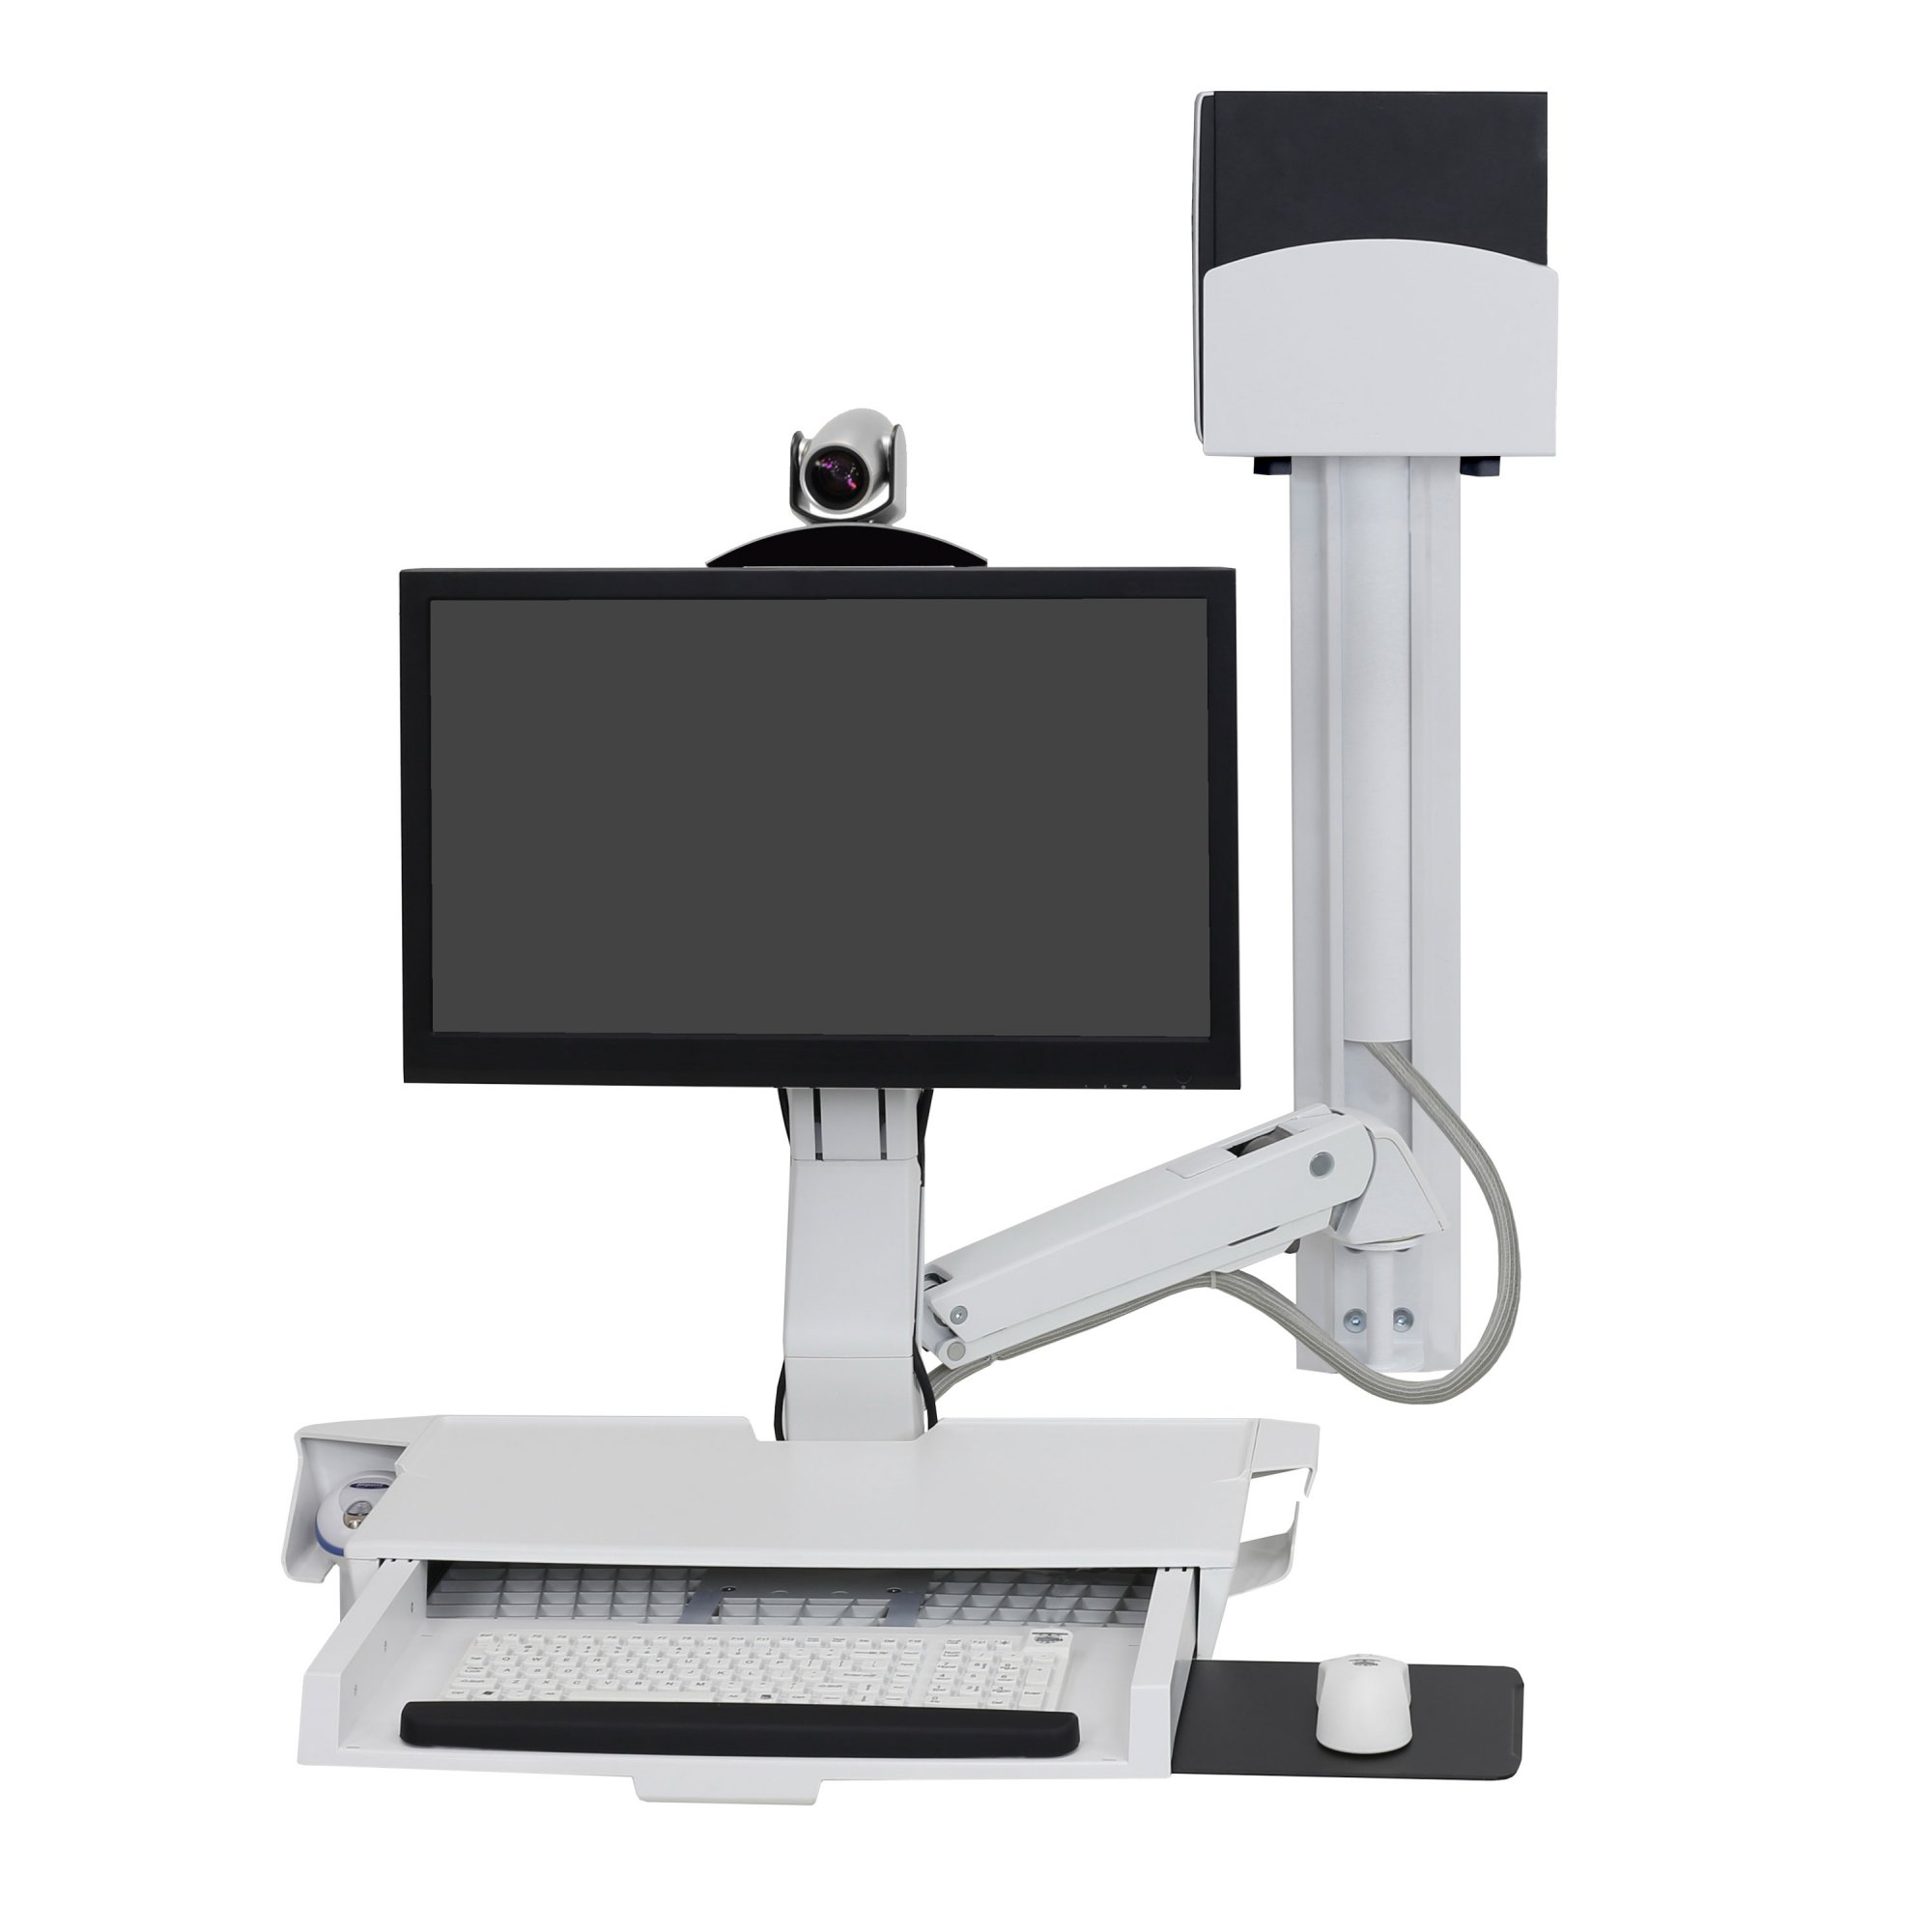 Ergotron 45-594-216 SV Combo System with Worksurface, Small CPU Holder (white)